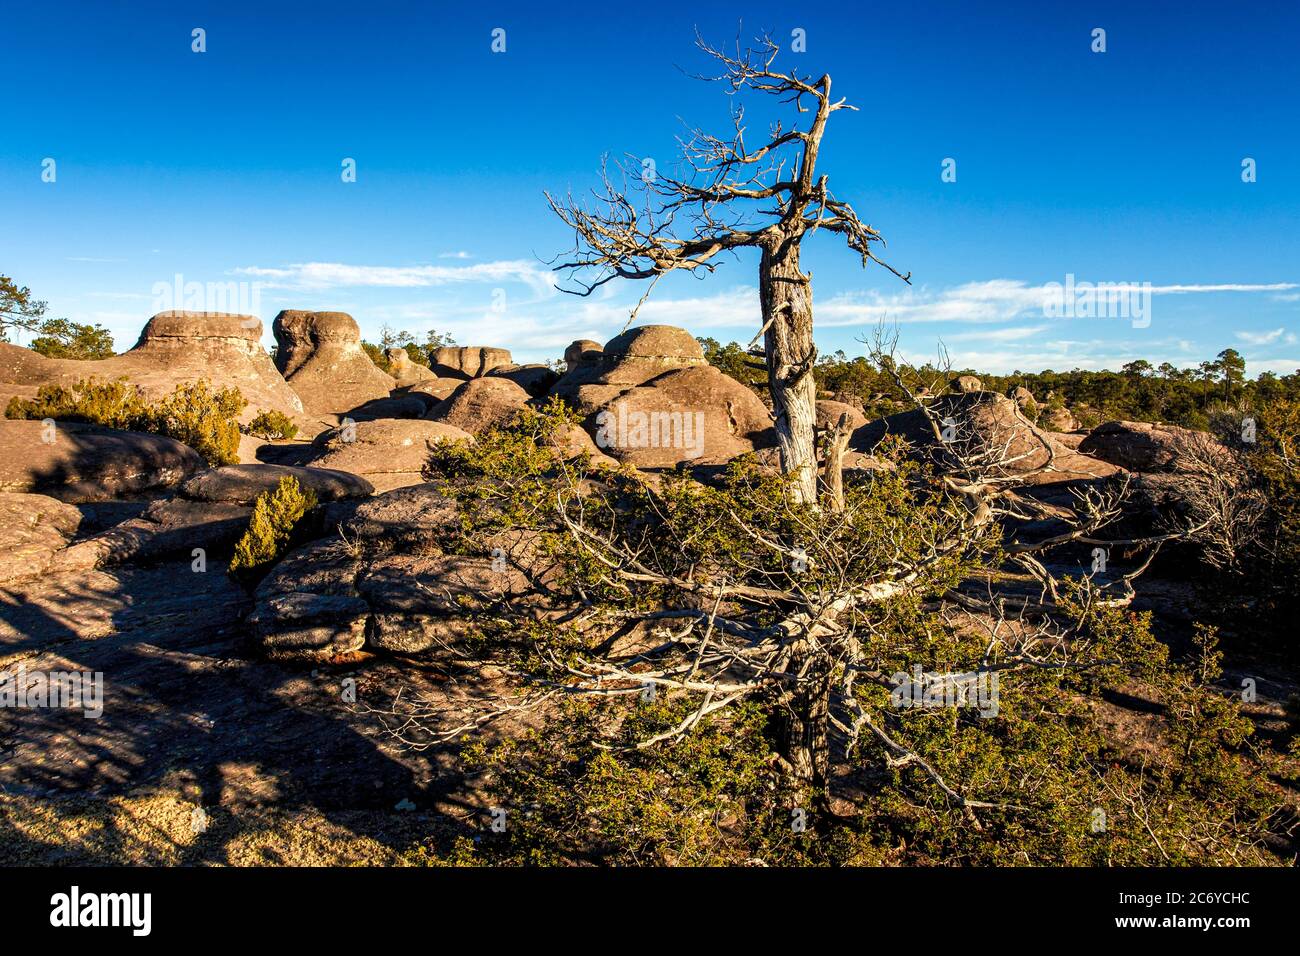 A lone tree amidst the unique rock formations of Mexiquillo, Durango, Mexico. Stock Photo